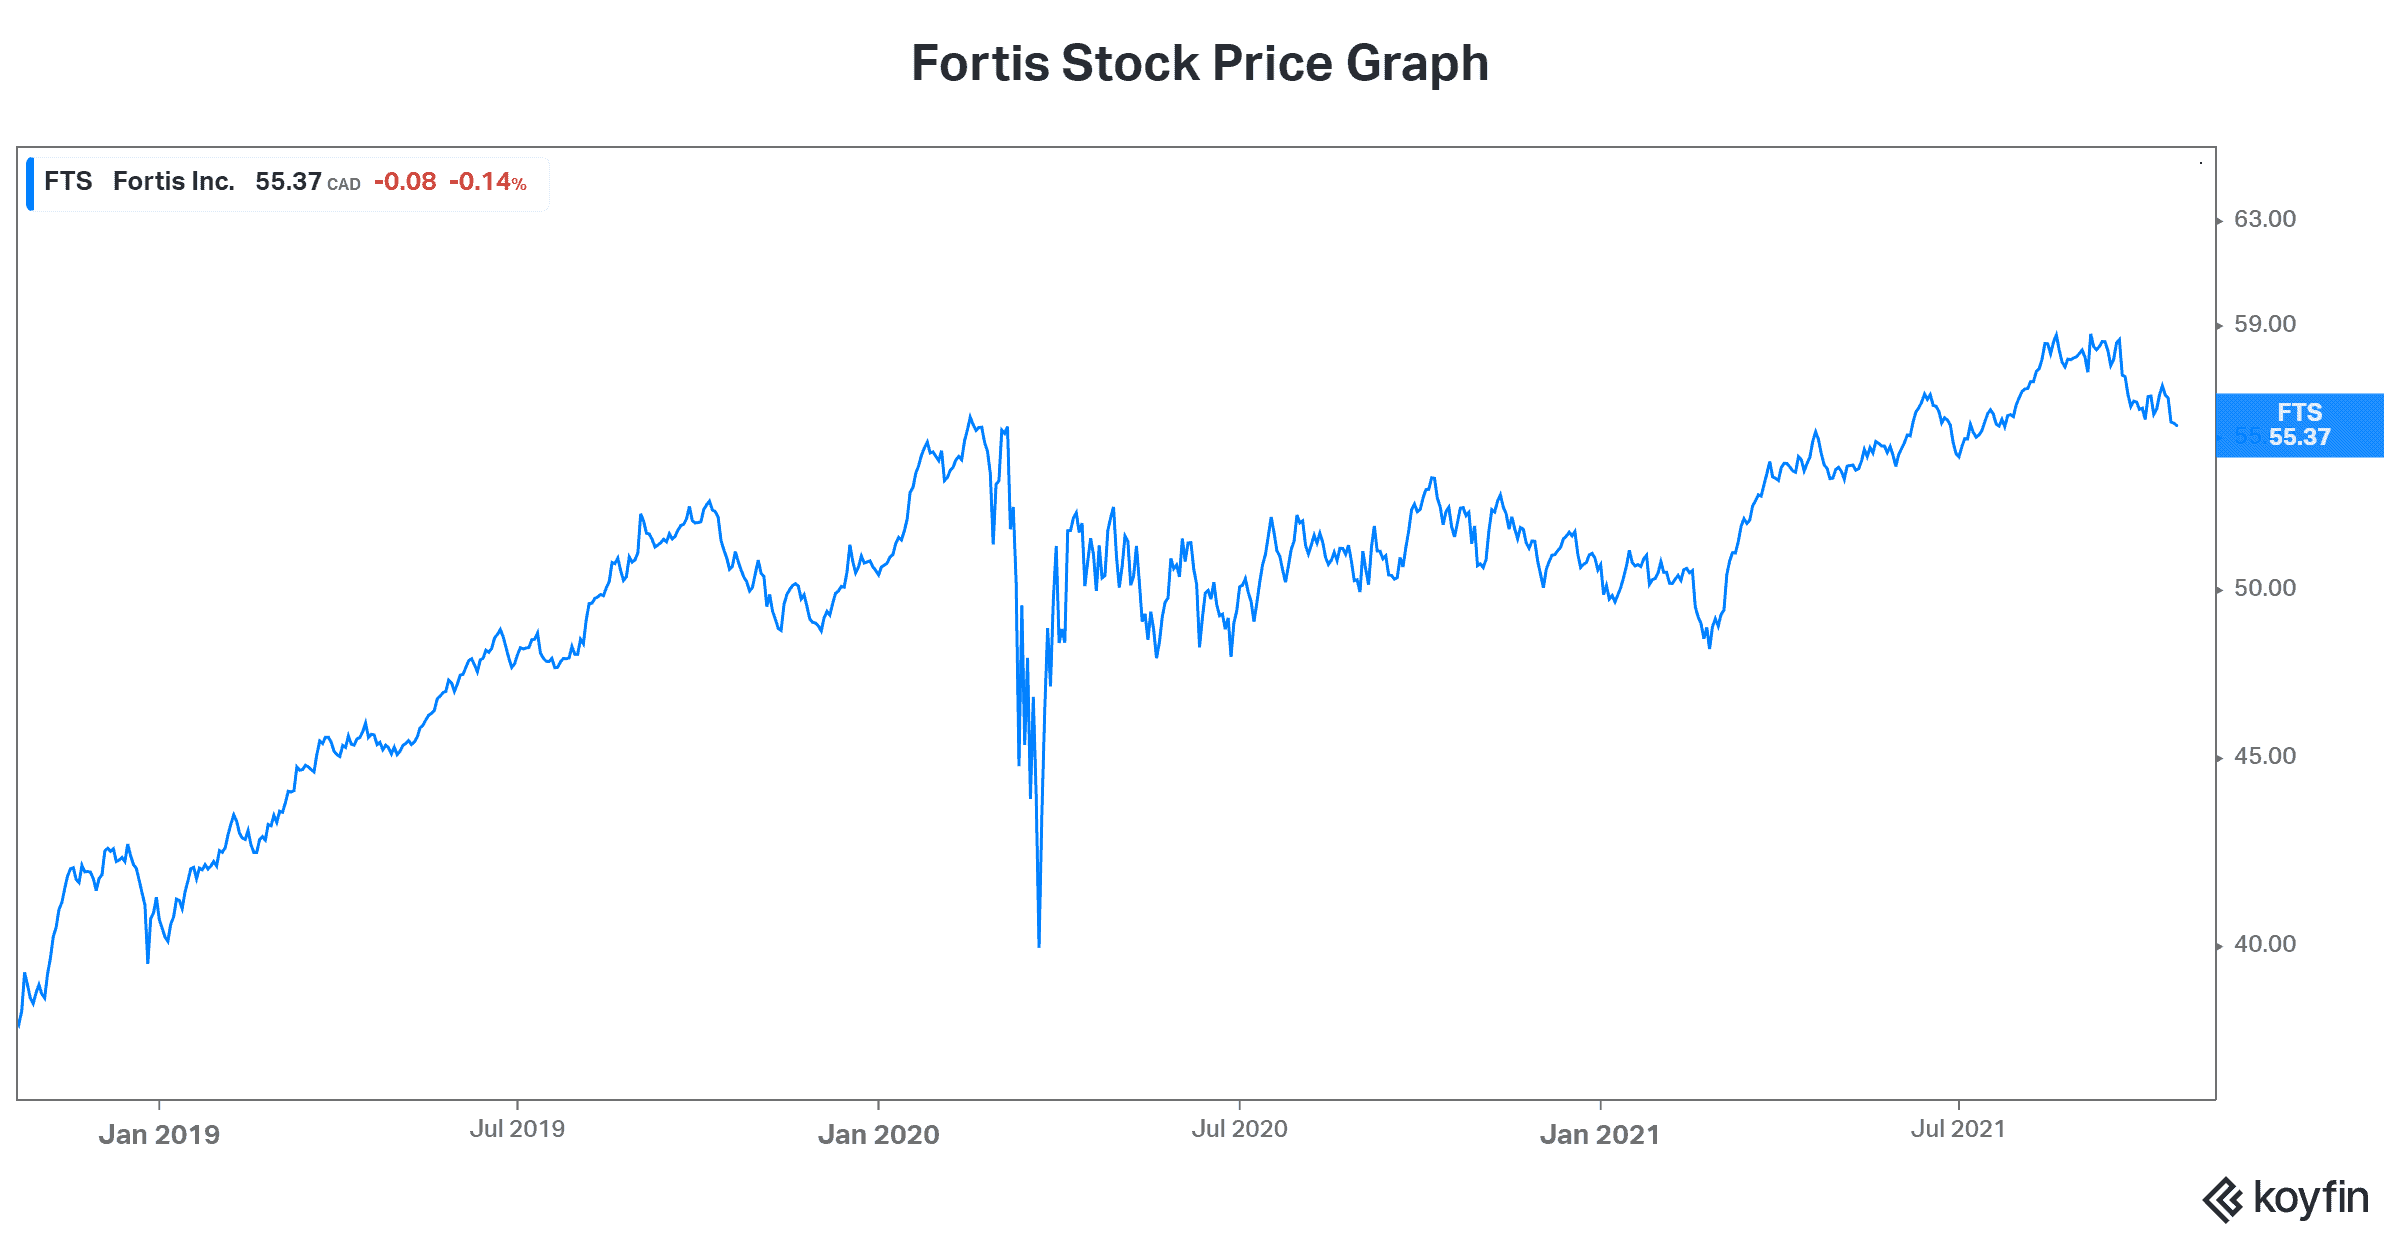 TSX 60 component Fortis stock